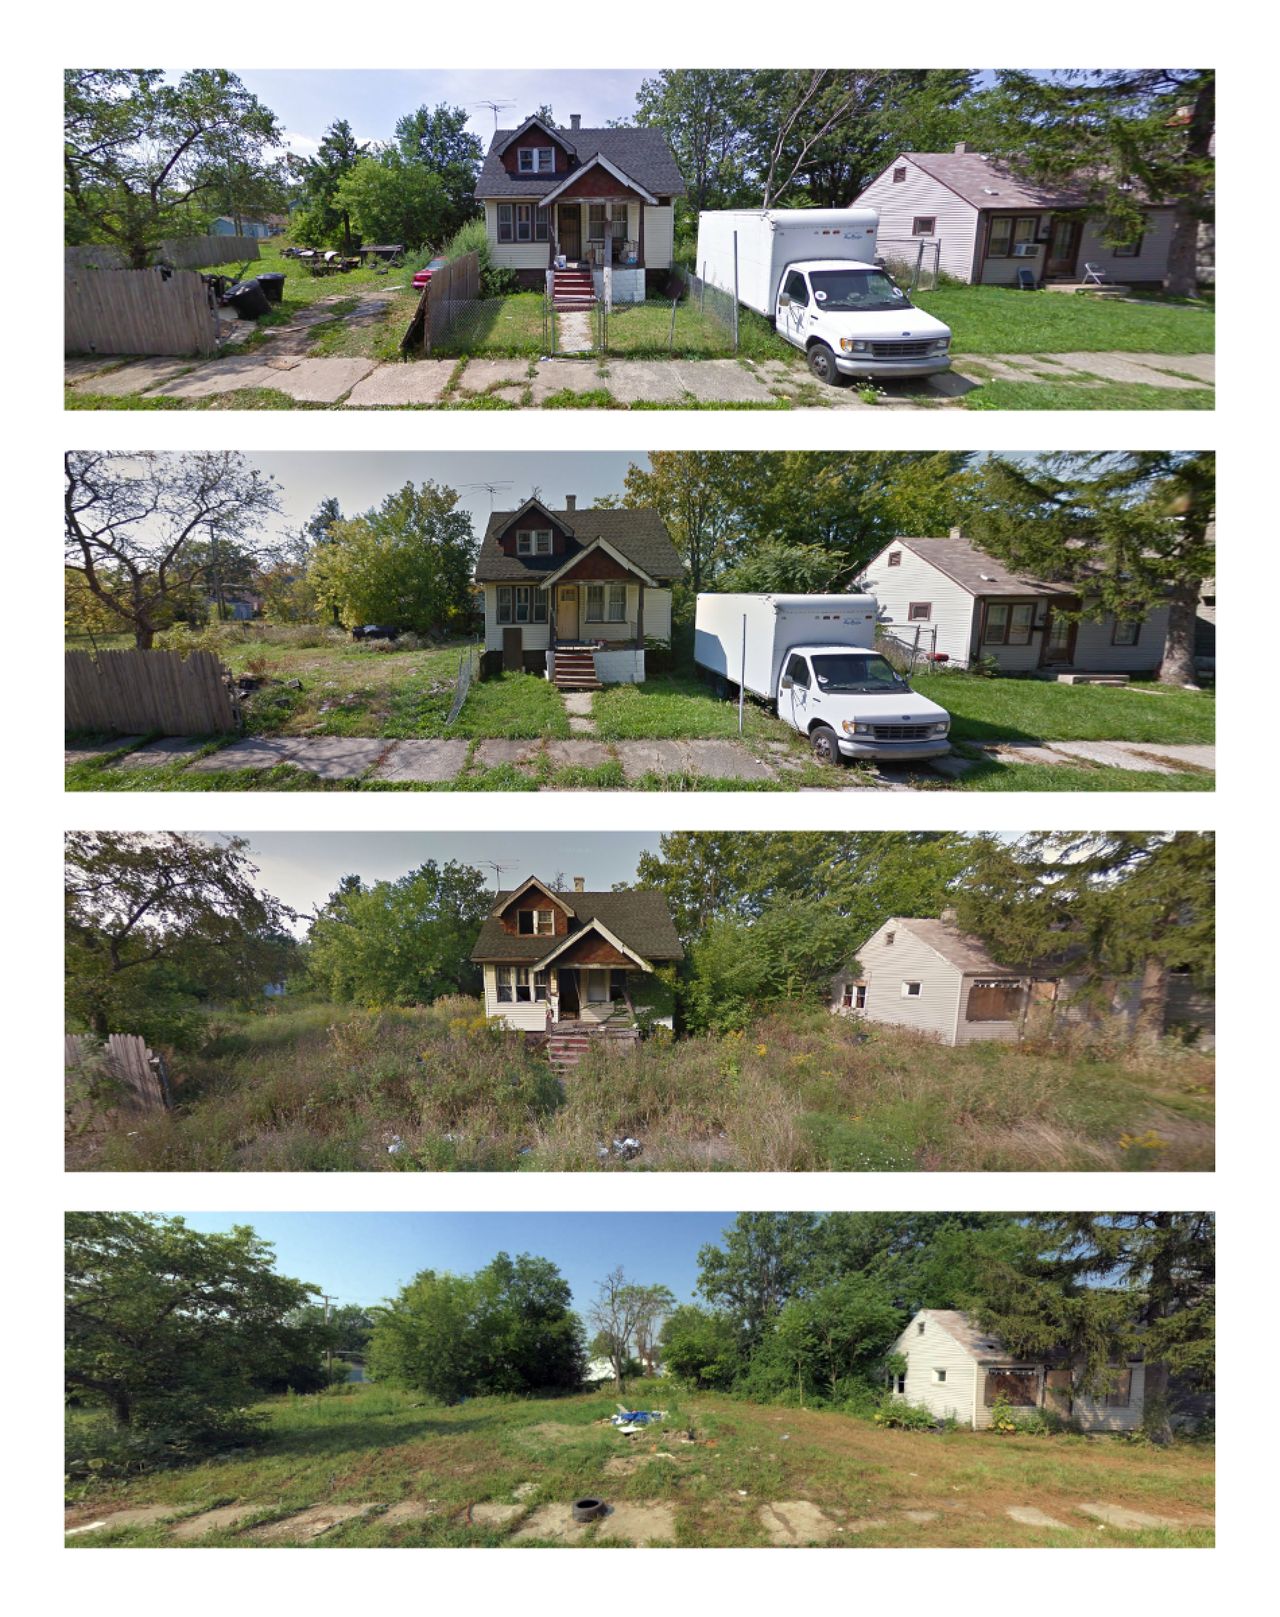 Barham Street in the Morningside neighborhood was captured by Bing and Google in August 2009, October 2011, September 2013 and August 2014.